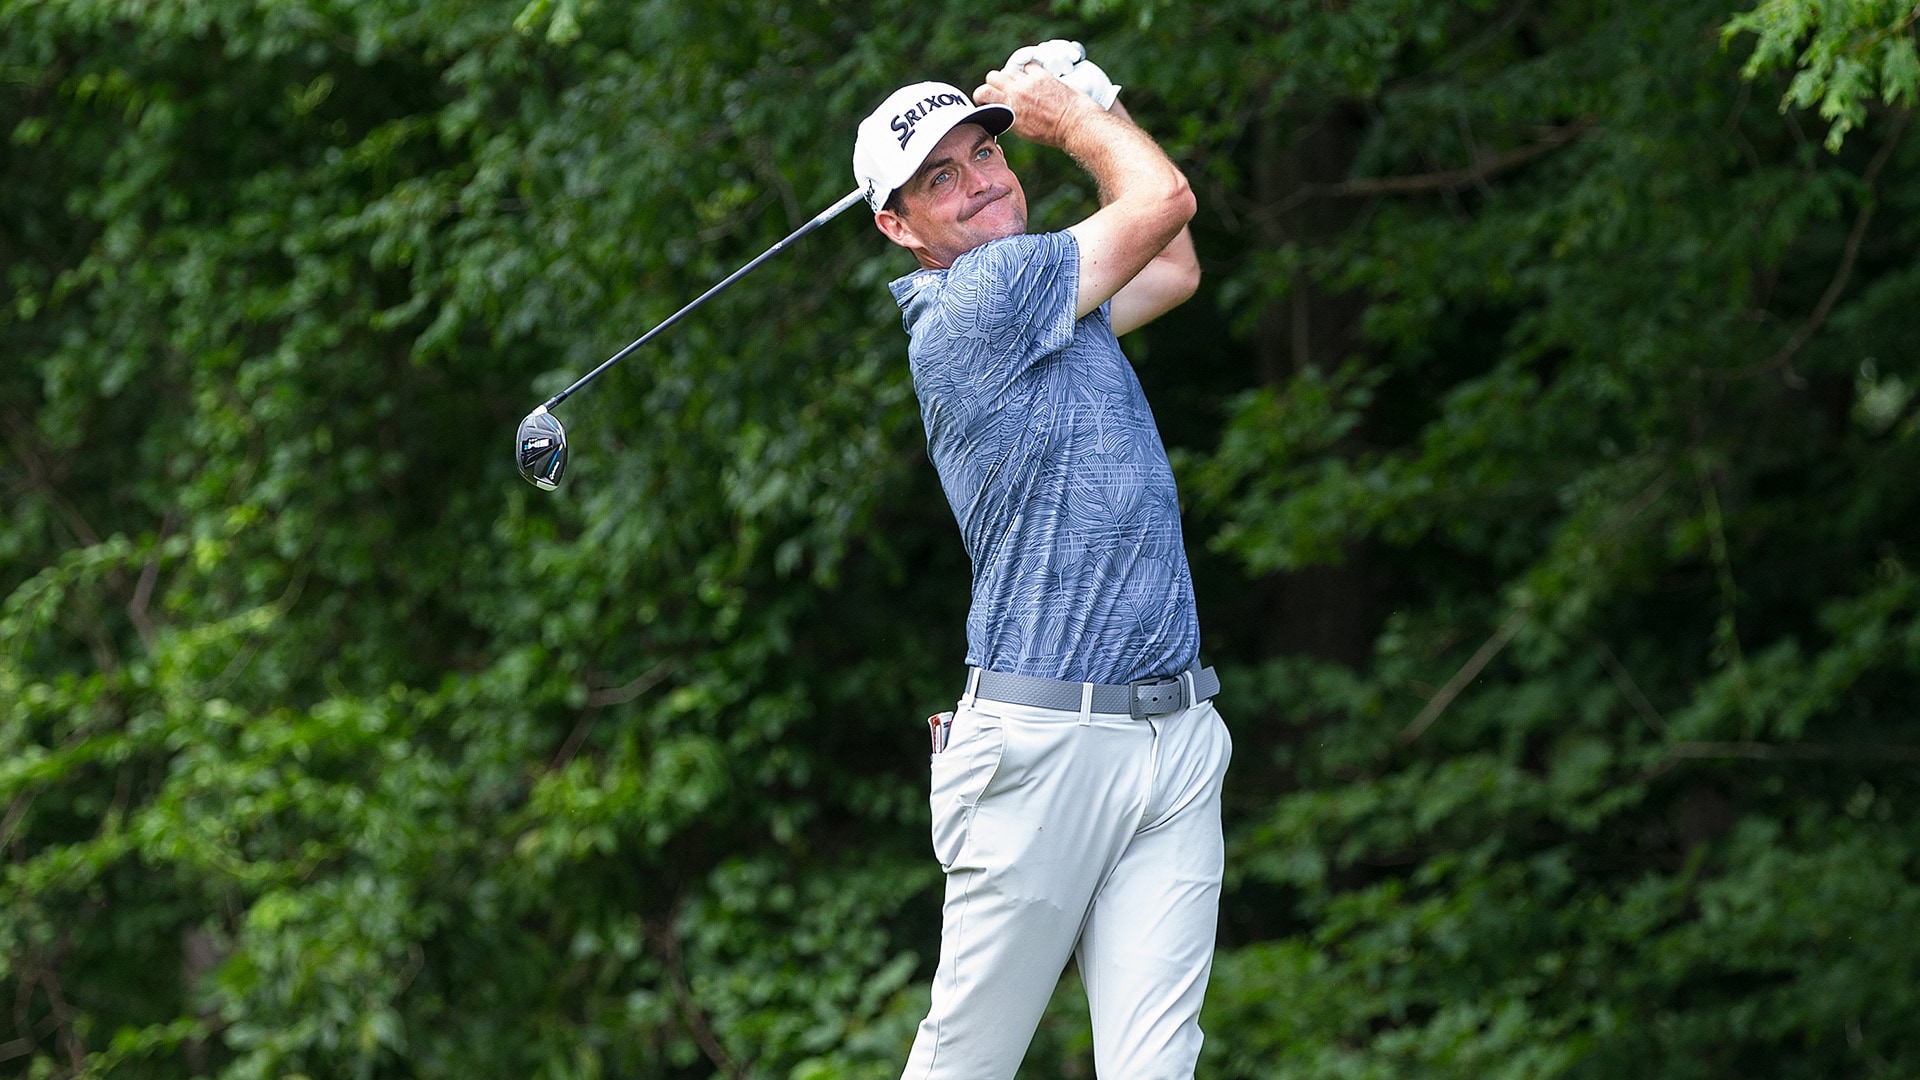 Keegan Bradley and Denny McCarthy share Travelers lead at record 15 under